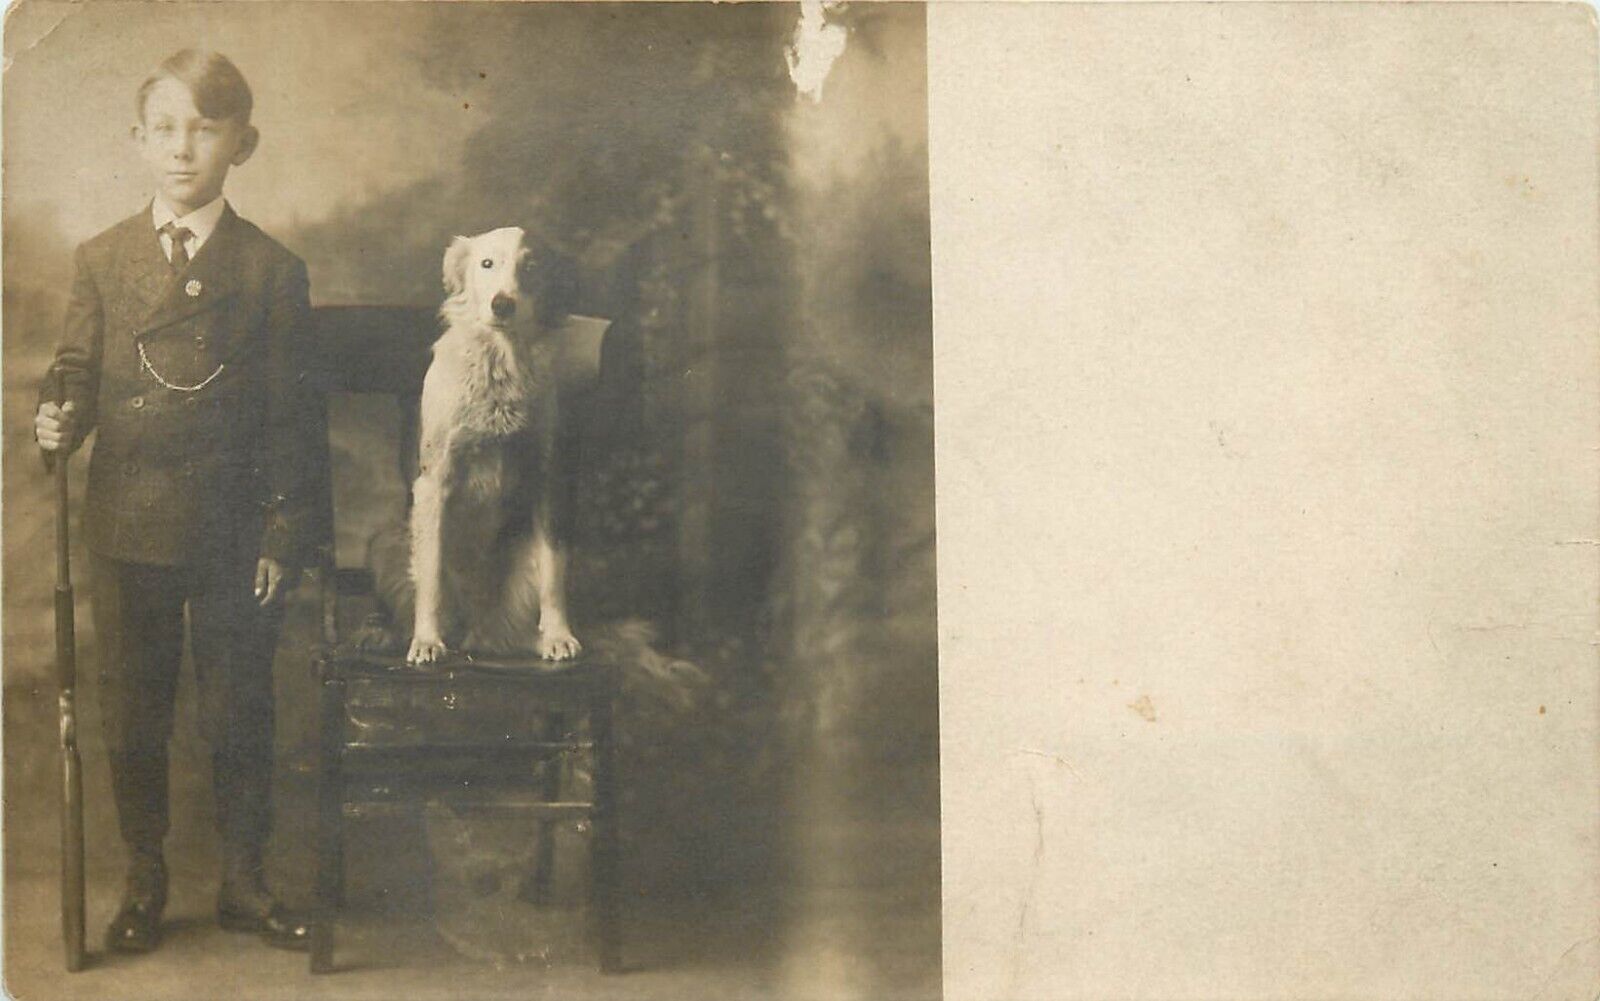 1912 Animal RPPC; Dog Named Dot & His Boy with Gun, Unknown US Location